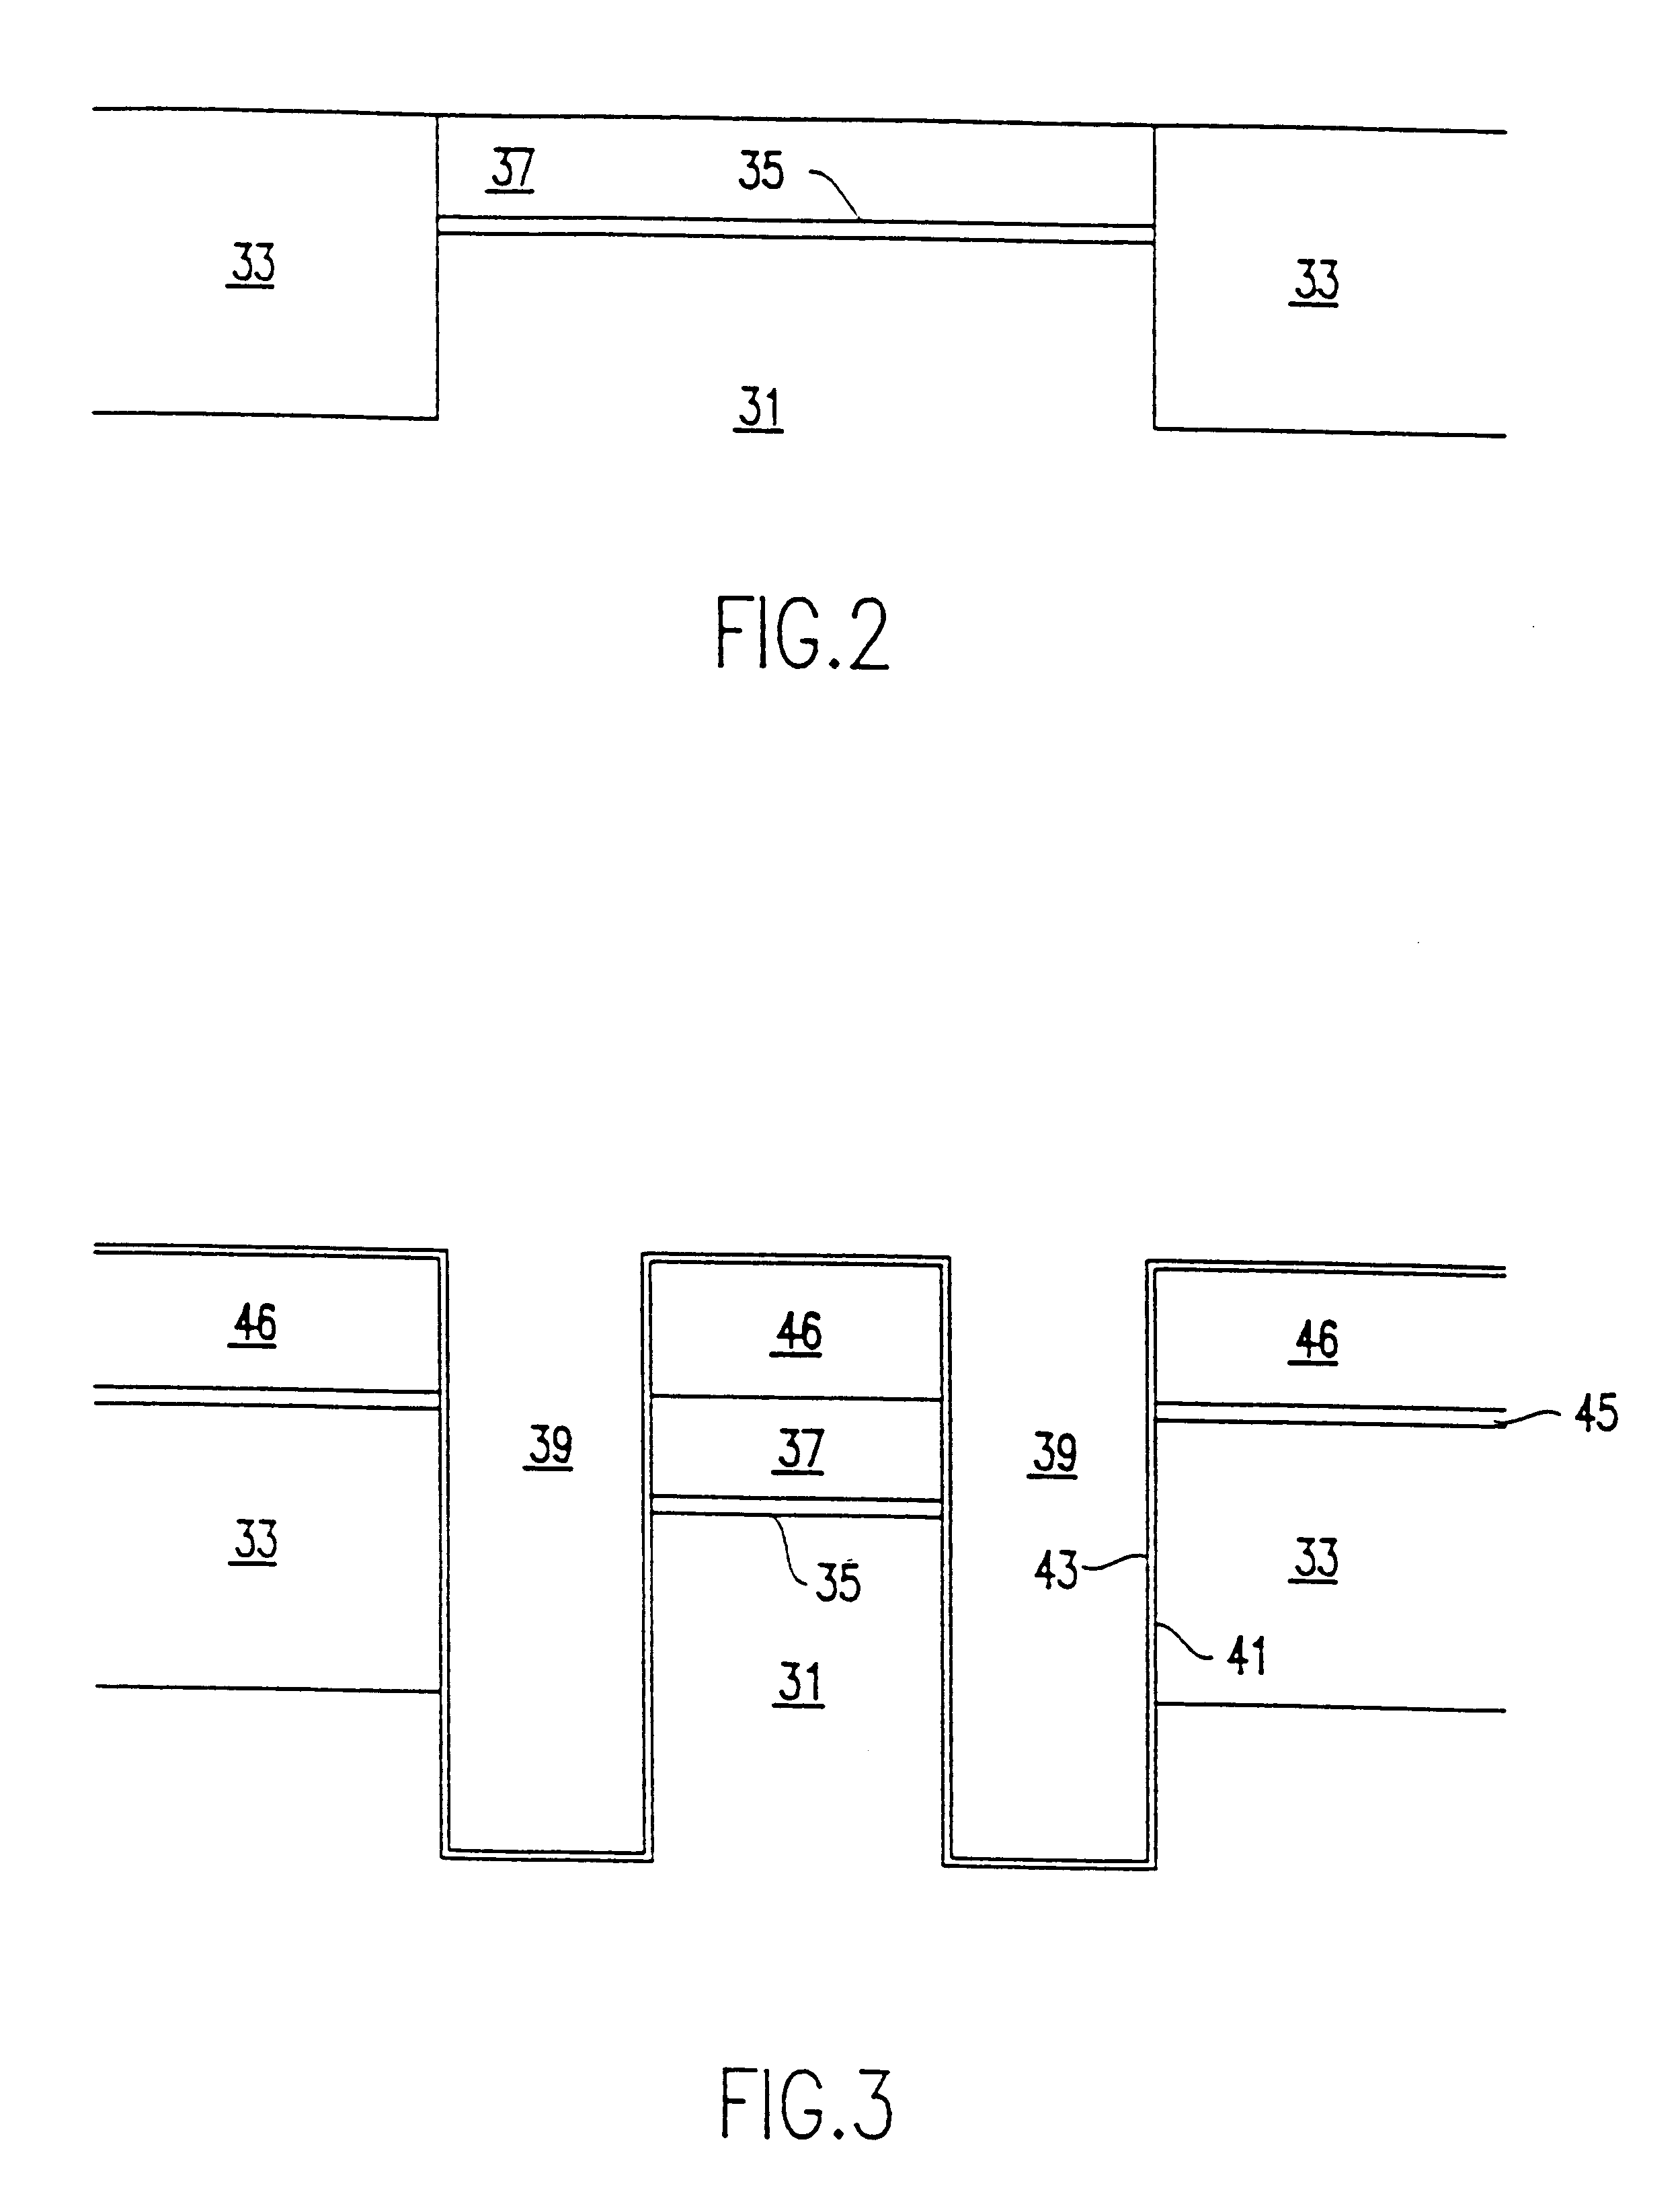 Trench storage dynamic random access memory cell with vertical transfer device